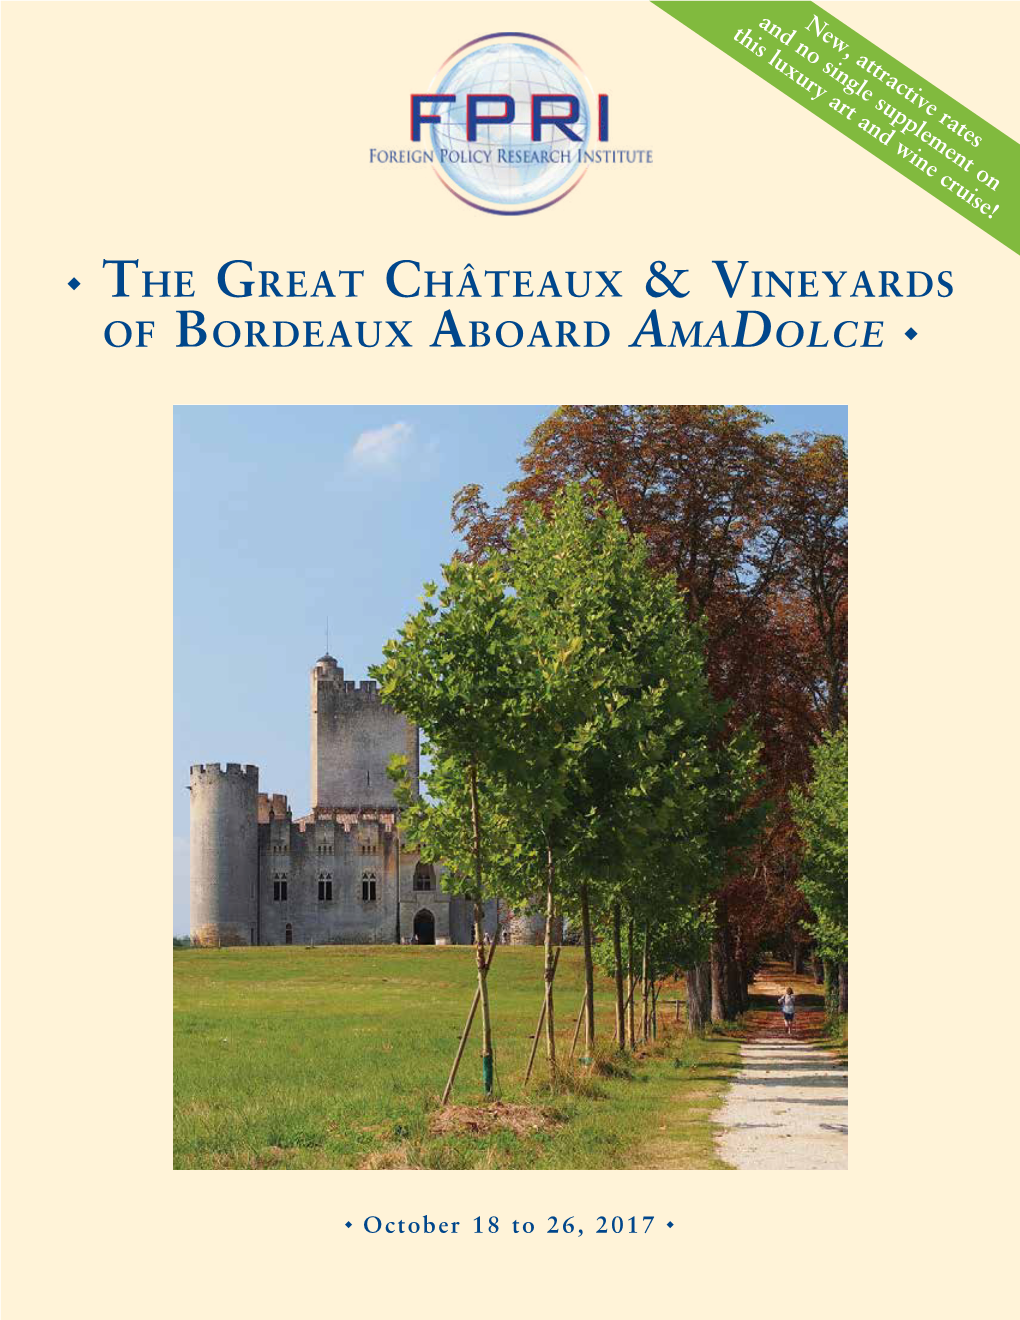 The Great Châteaux & Vineyards of the Bordeaux